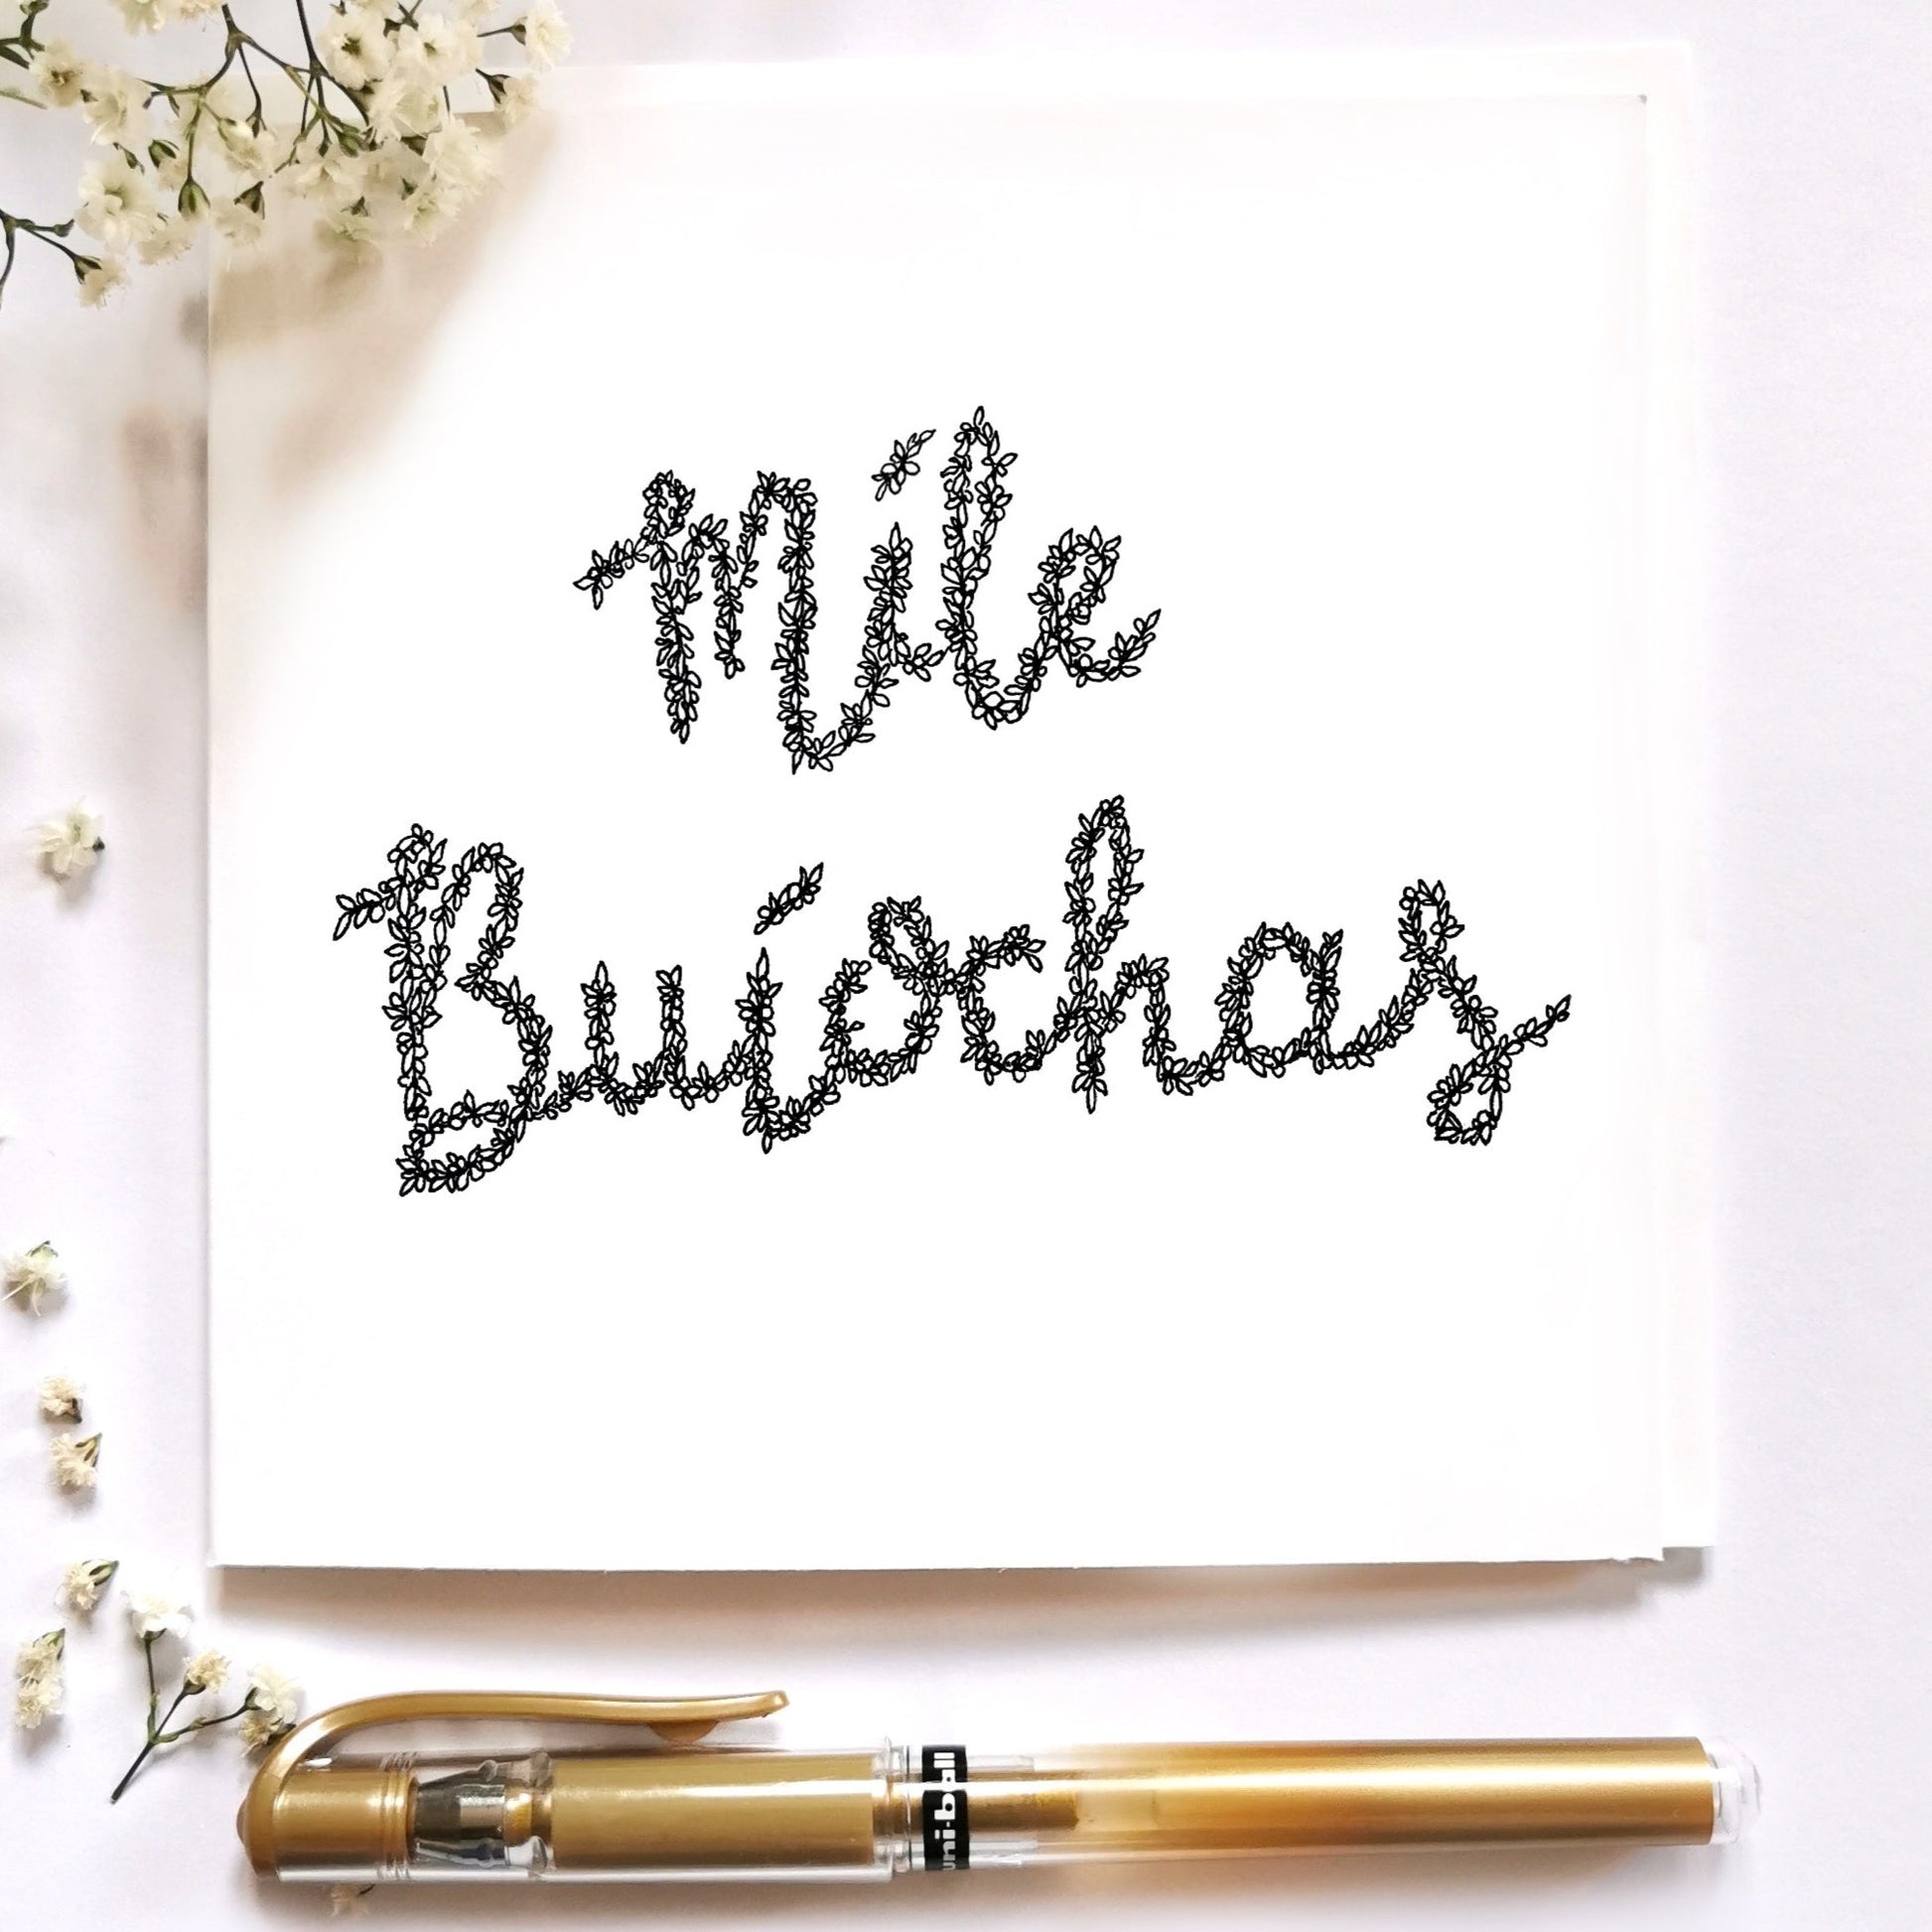 Image shows illustration of the Irish saying Míle Buíochas meaning Thanks A Million. illustration is drawn from petals flowers and a variety of plants. Image is entirely black. Illustration is set on a white card that's laid on a cream background with gold pen and white floral arrangements to dress up.